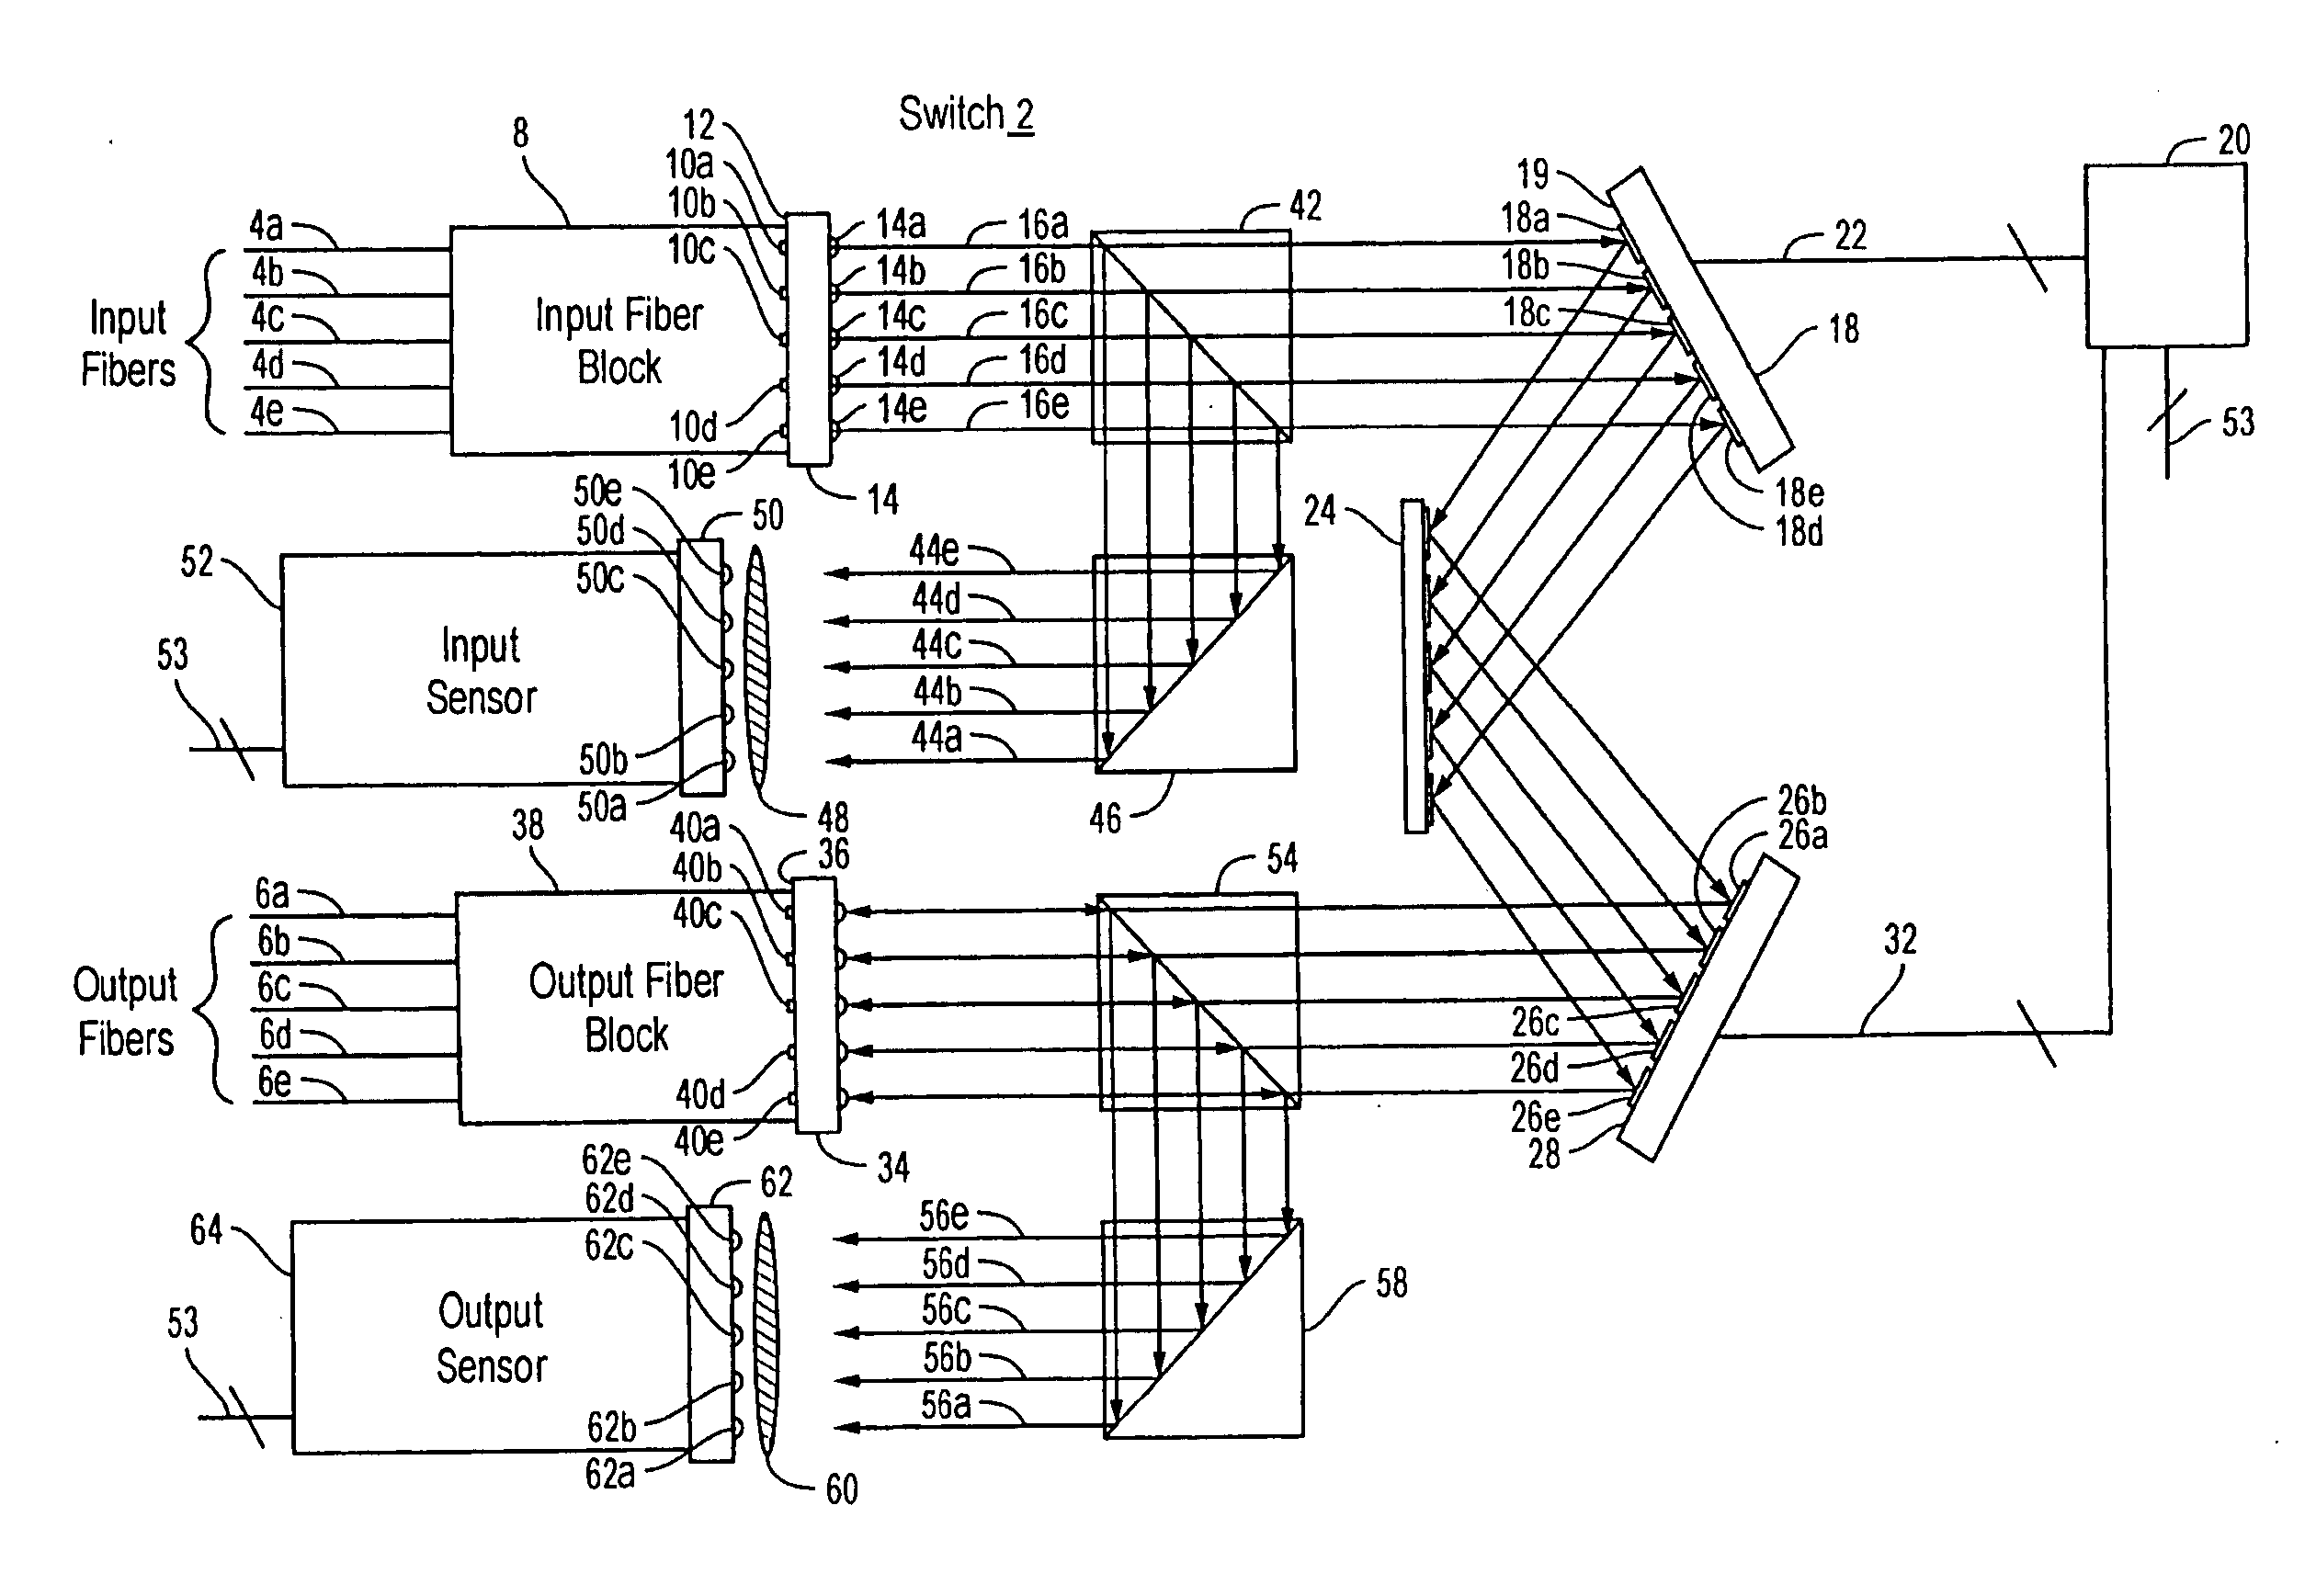 Optical system for calibration and control of an optical fiber switch